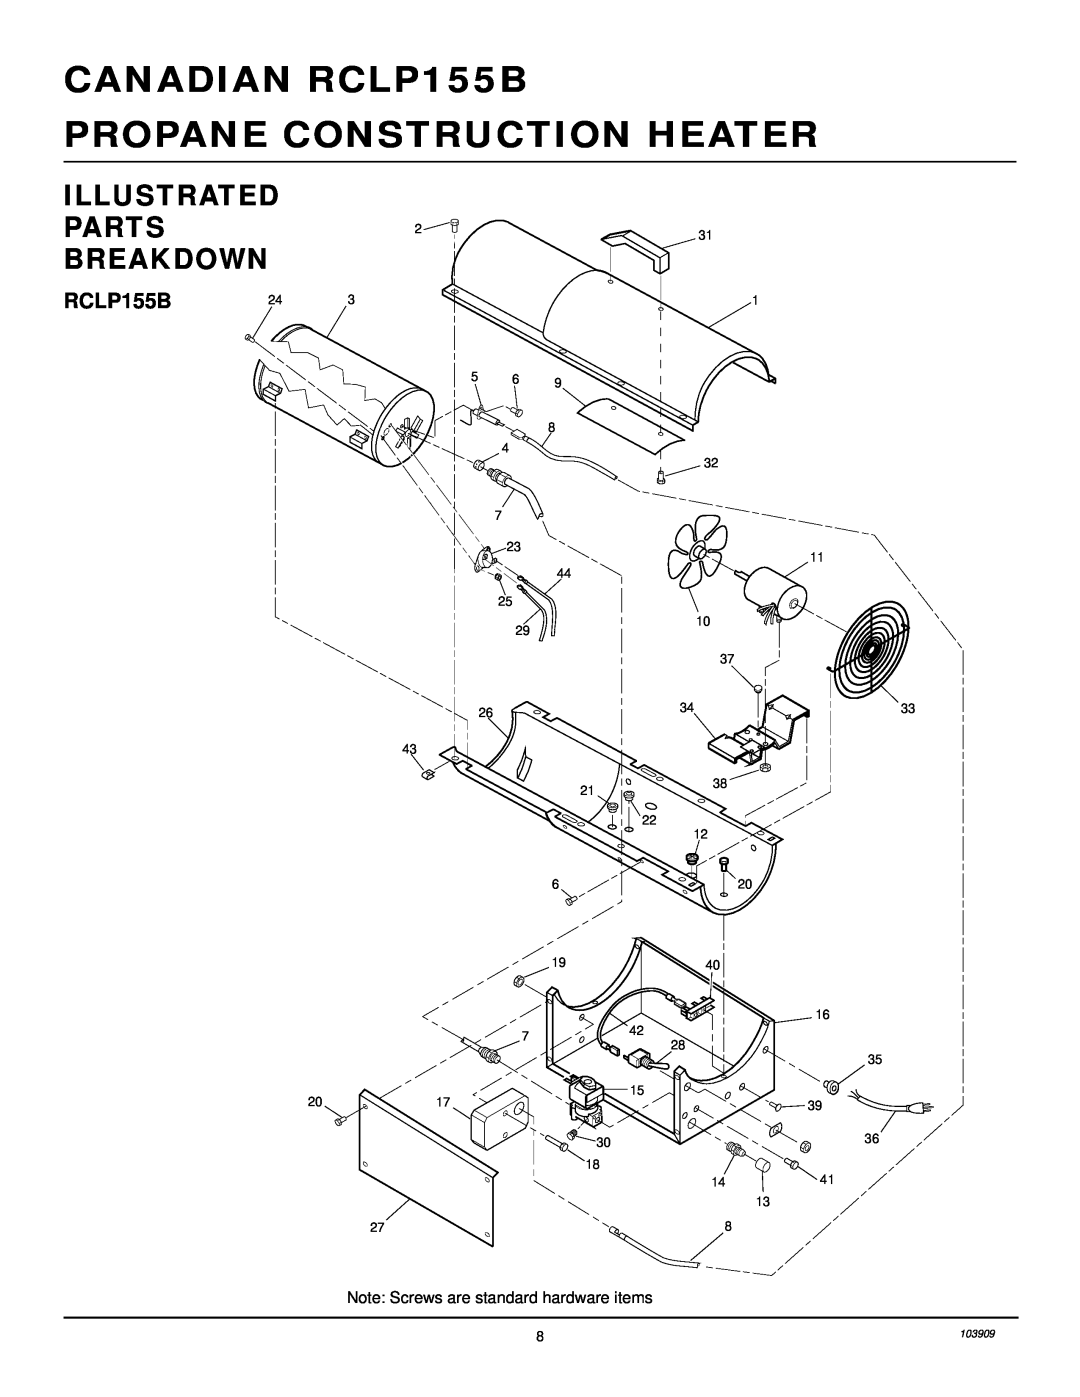 Desa owner manual ILLUSTRATED PARTS2 BREAKDOWN, CANADIAN RCLP155B PROPANE CONSTRUCTION HEATER, 103909 